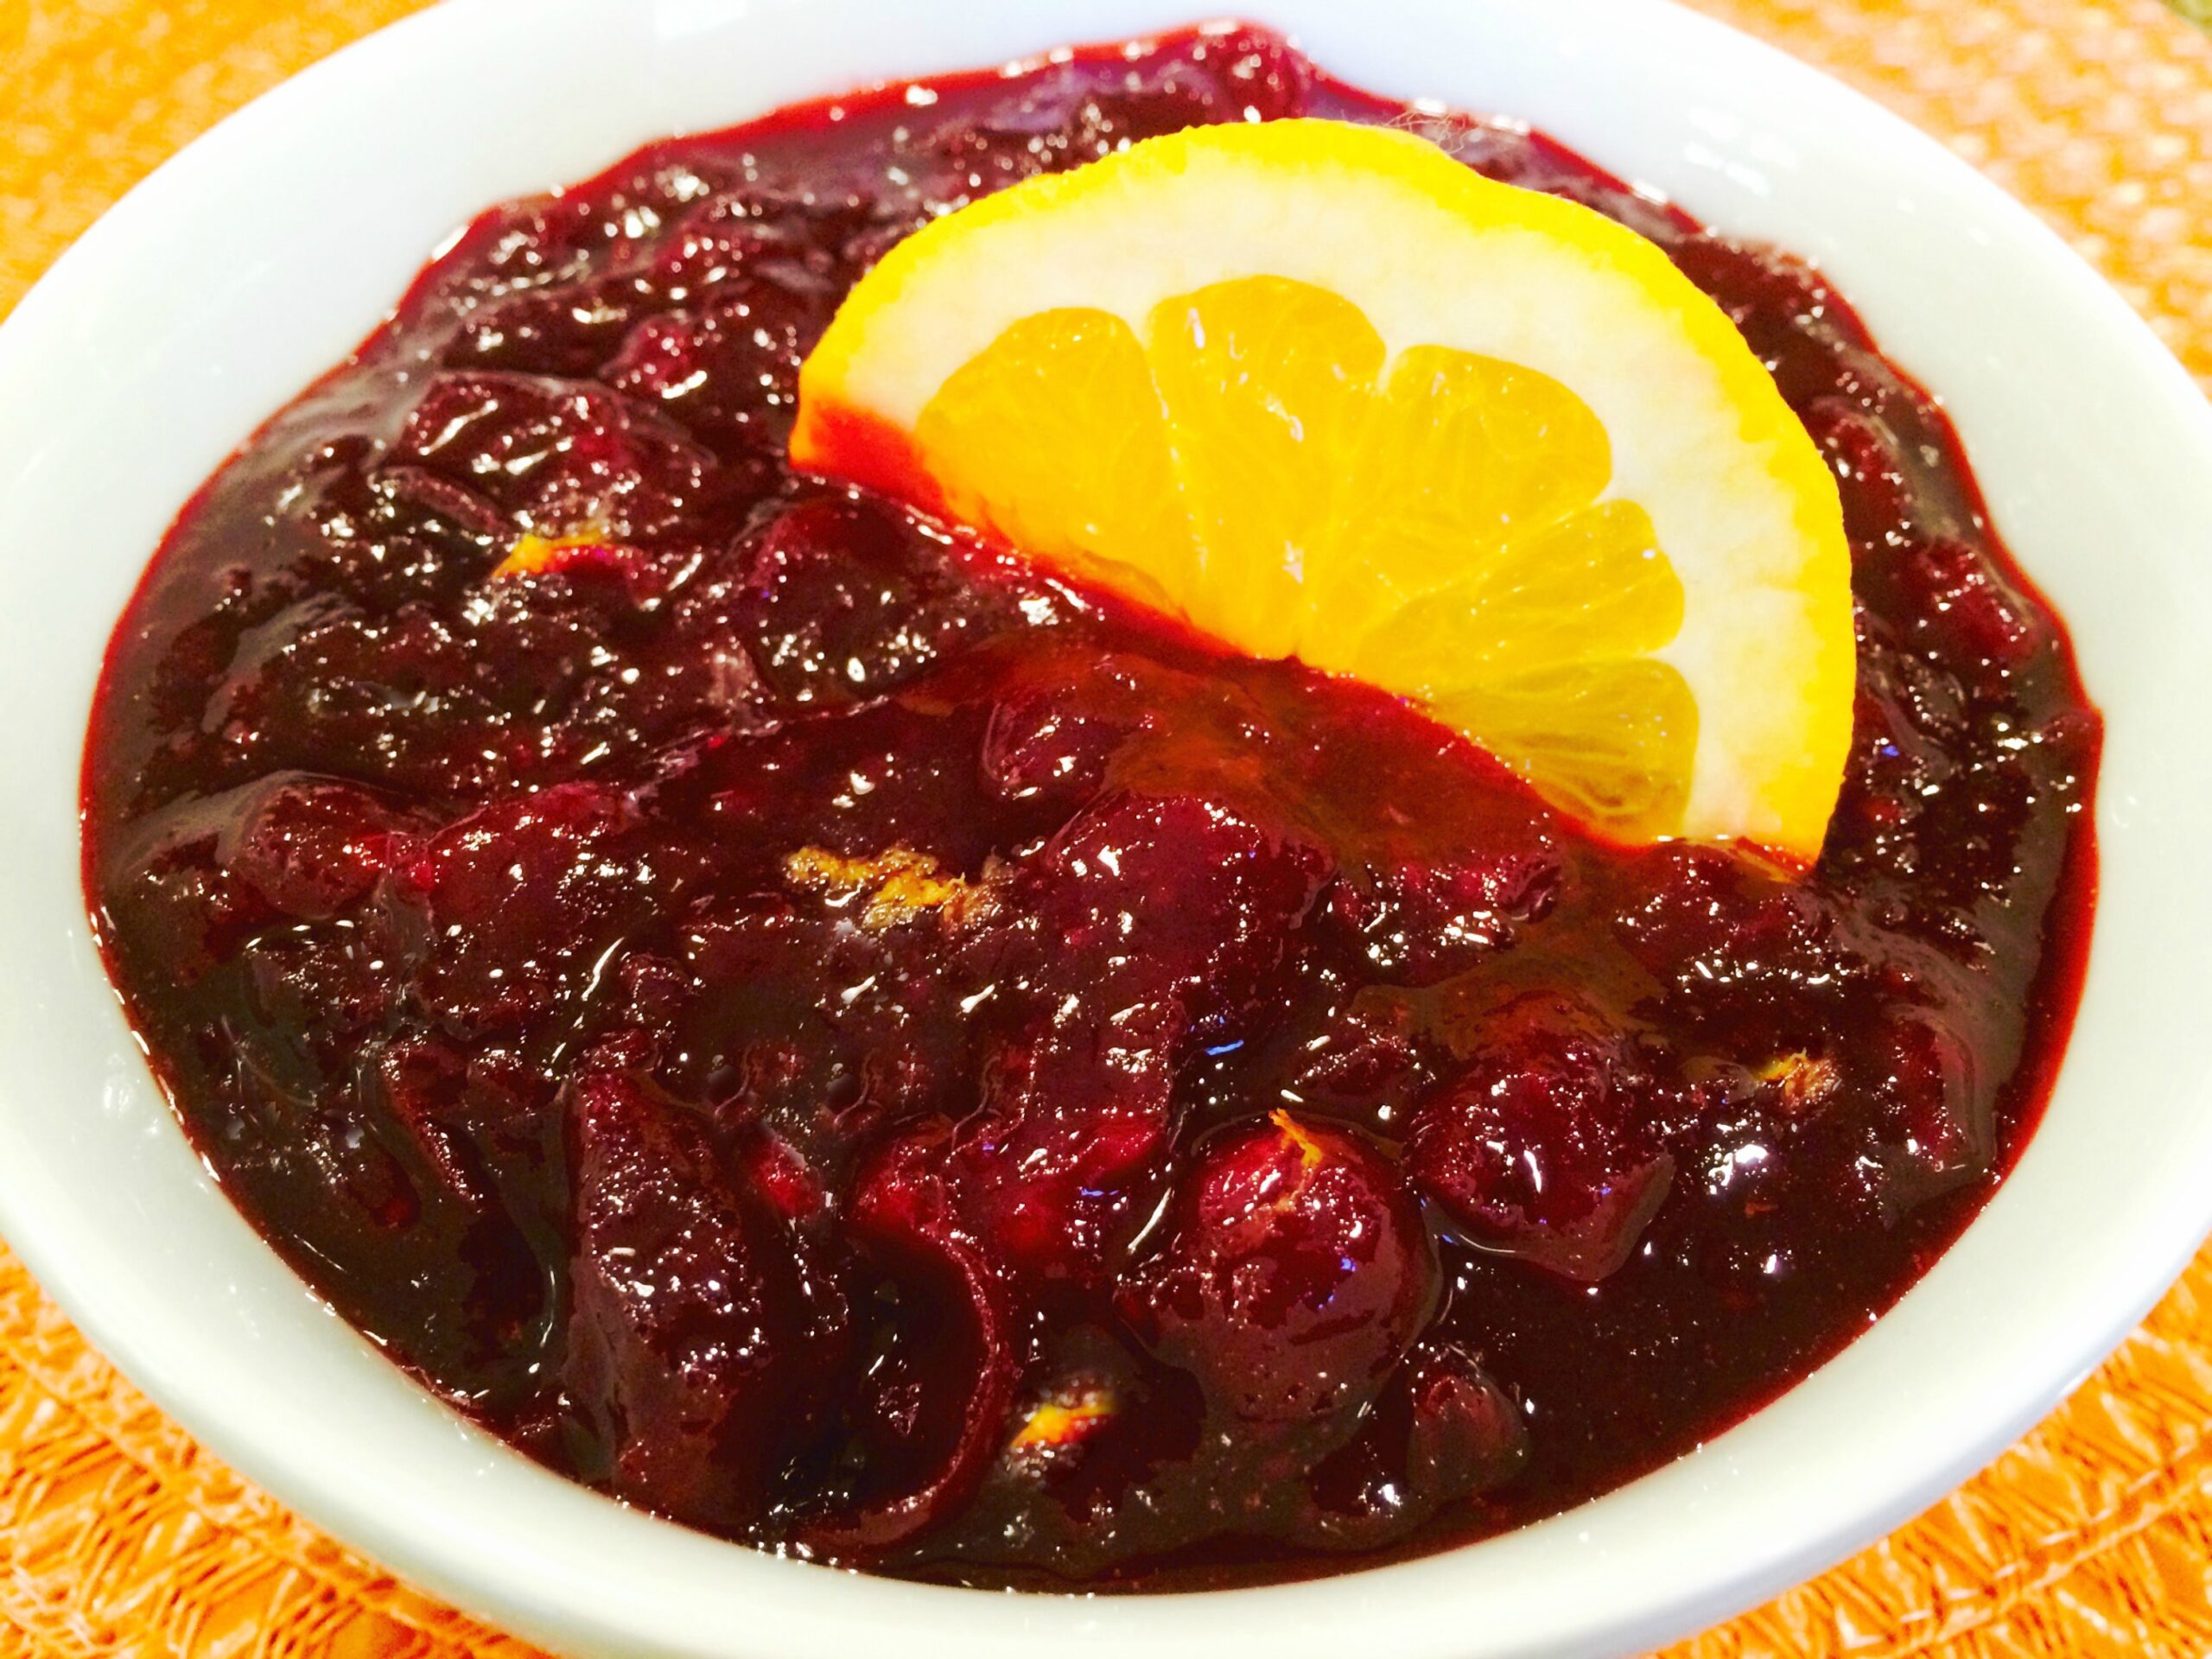 bowl of homemade cranberry sauce with slice of orange